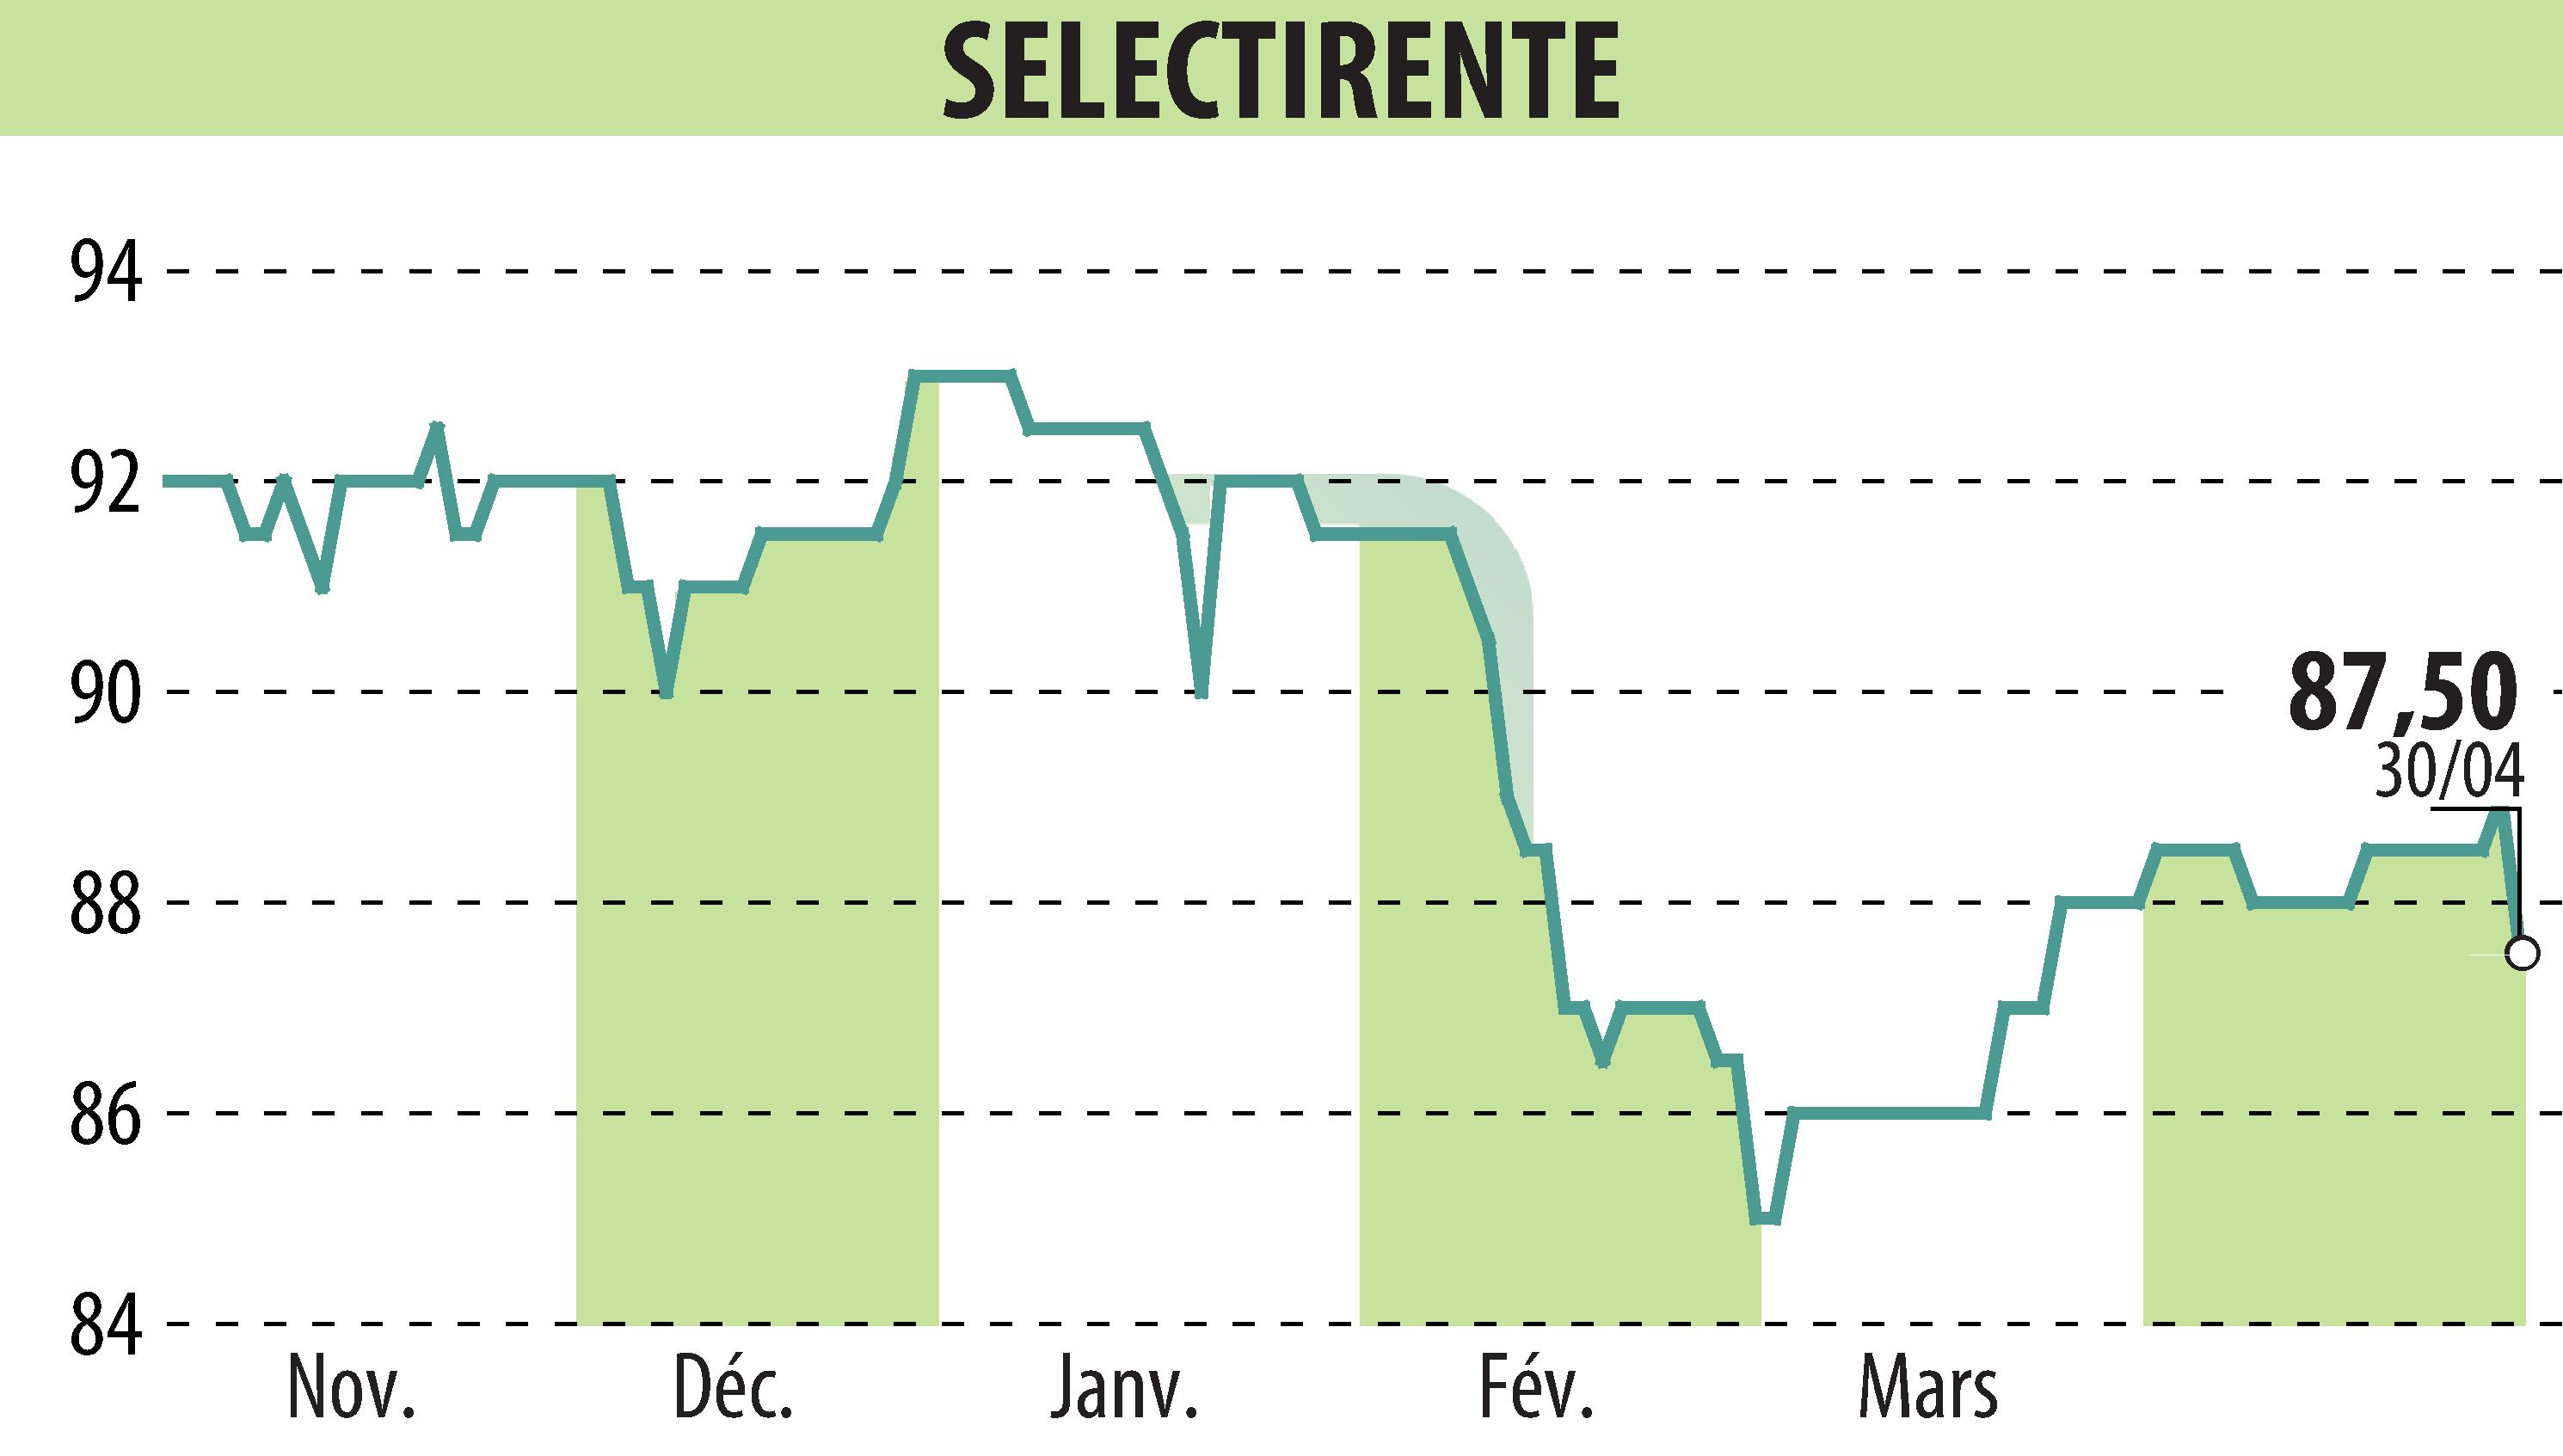 Stock price chart of SELECTIRENTE (EPA:SELER) showing fluctuations.